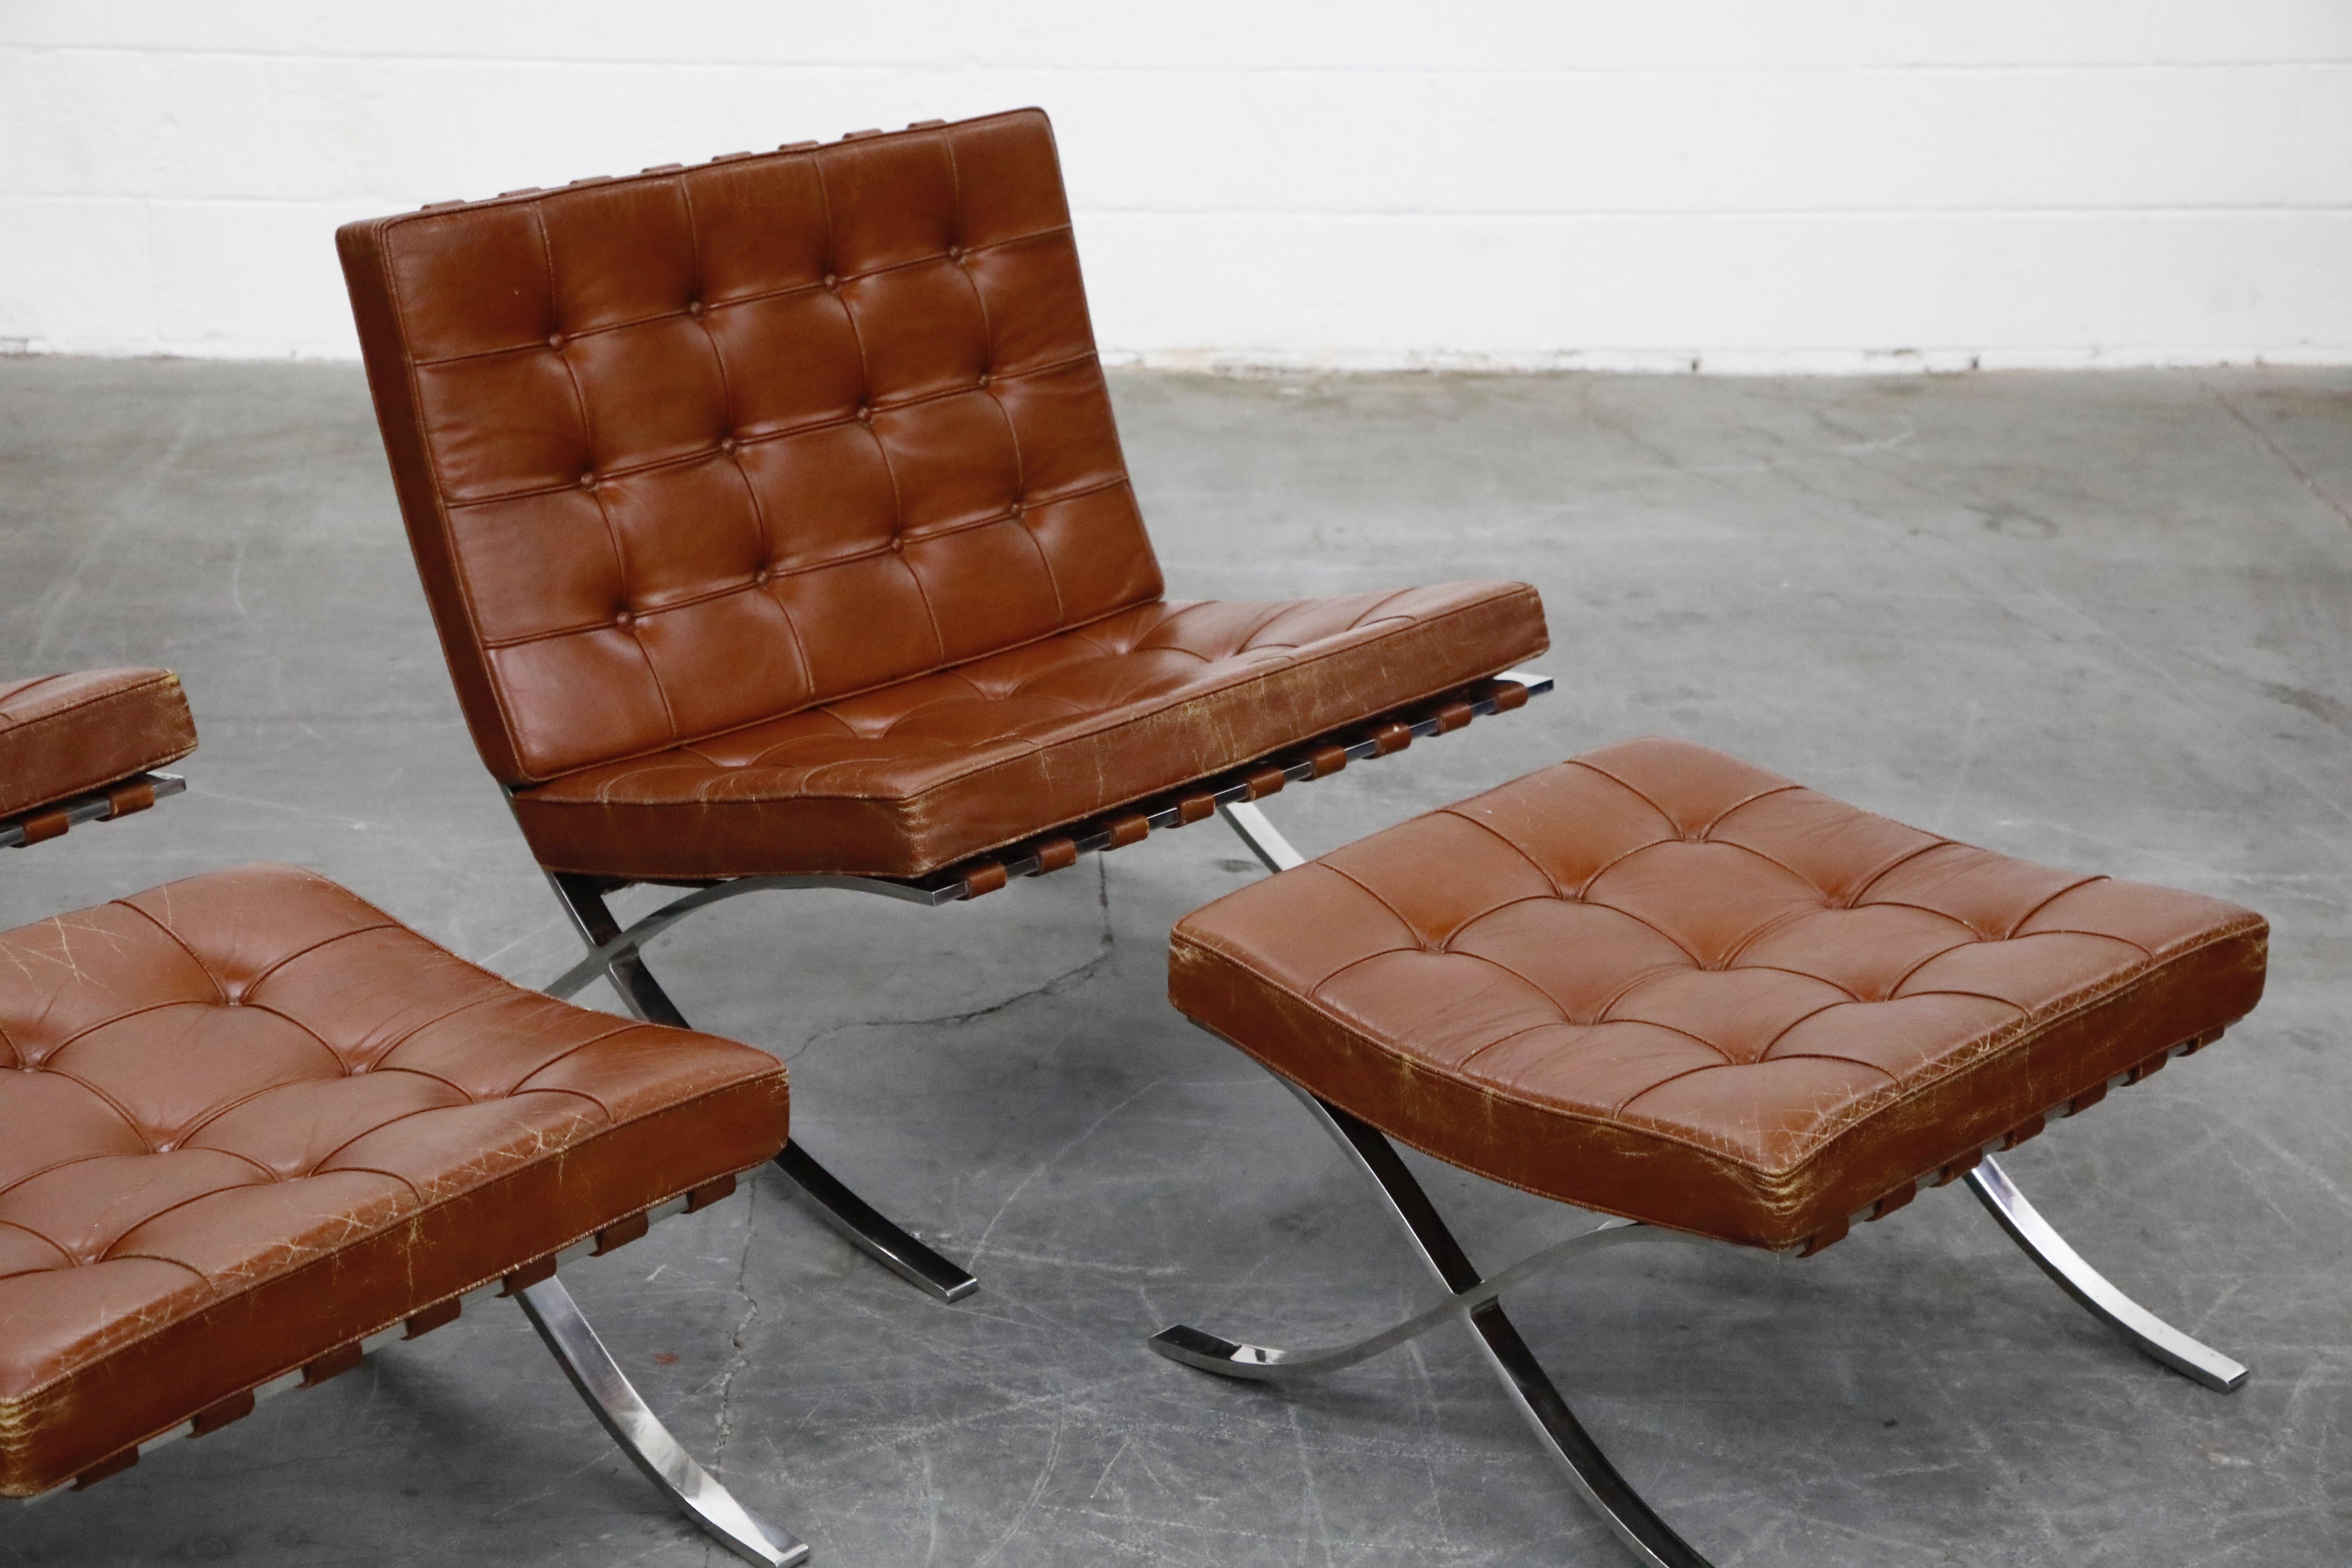 American Set of Knoll Associates Barcelona Chairs and Ottomans by Mies van der Rohe, 1961